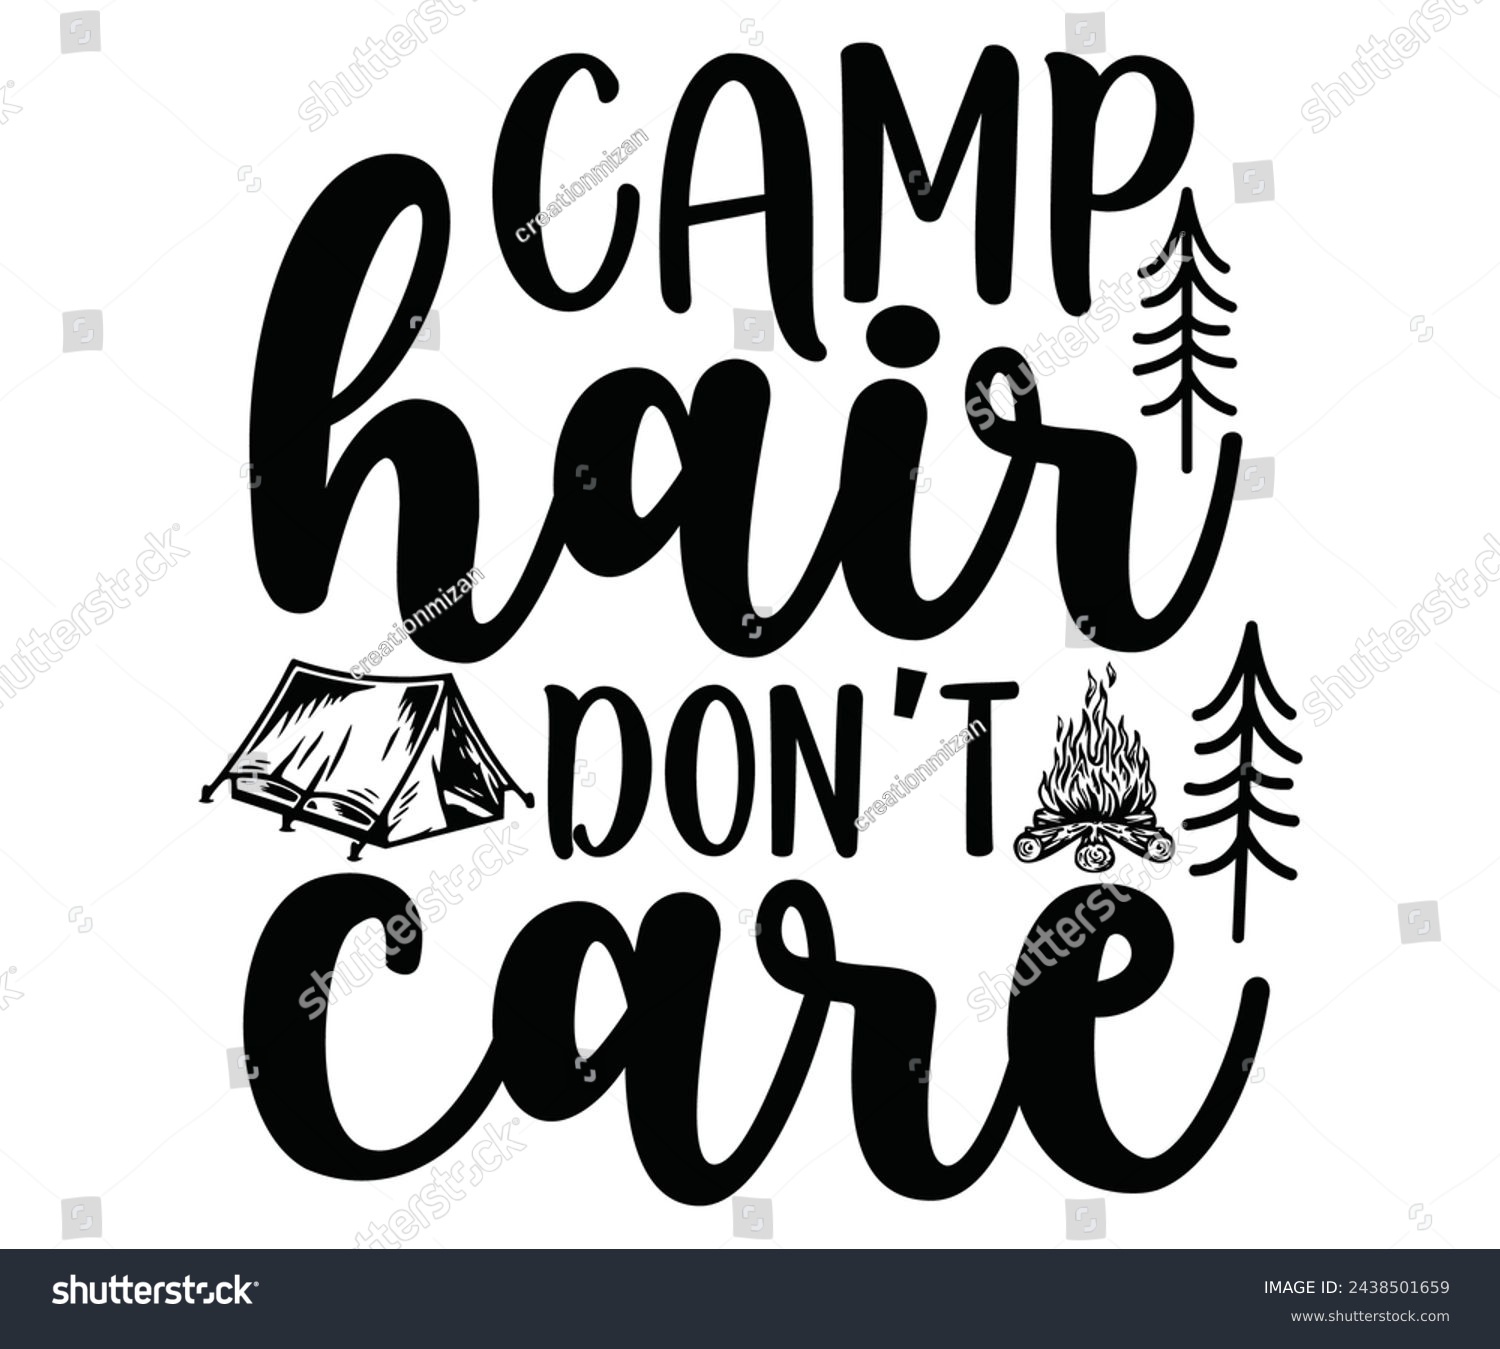 SVG of Camp Hair Don't Care Svg,Camping Svg,Hiking,Funny Camping,Adventure,Summer Camp,Happy Camper,Camp Life,Camp Saying,Camping Shirt svg